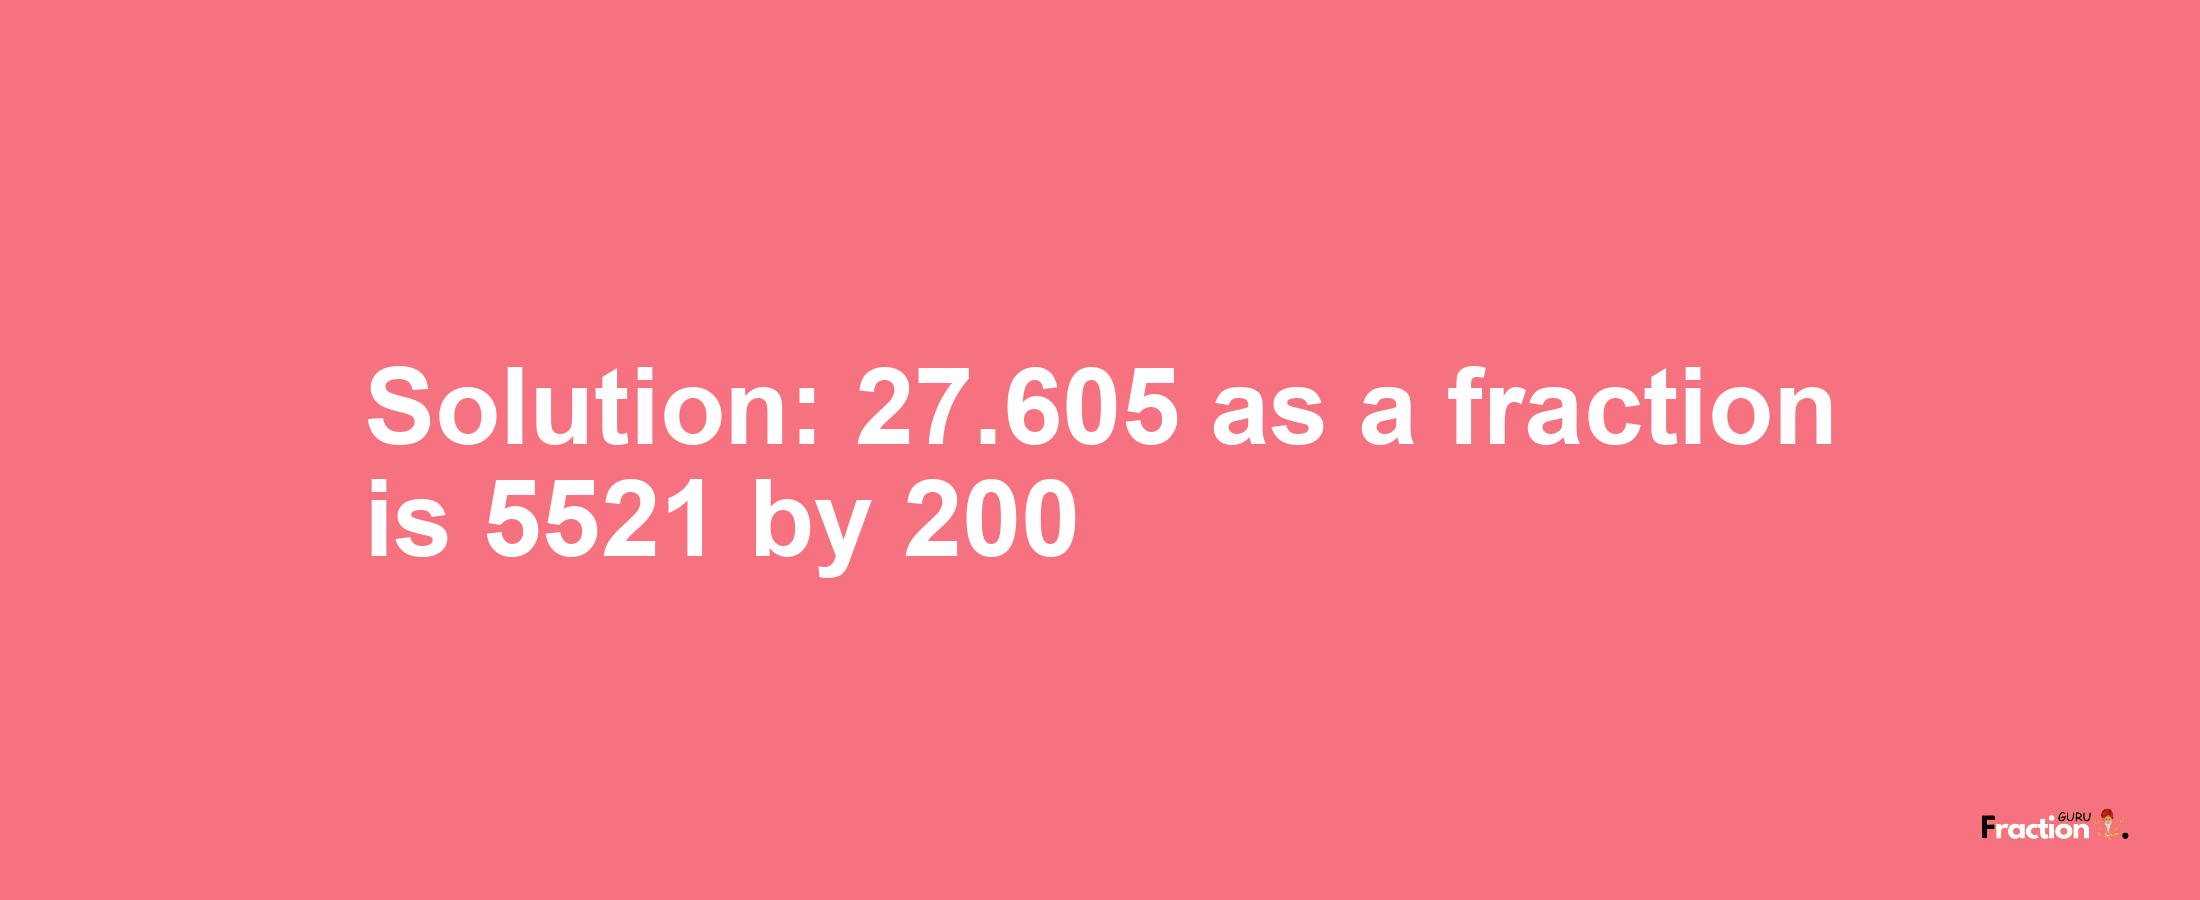 Solution:27.605 as a fraction is 5521/200